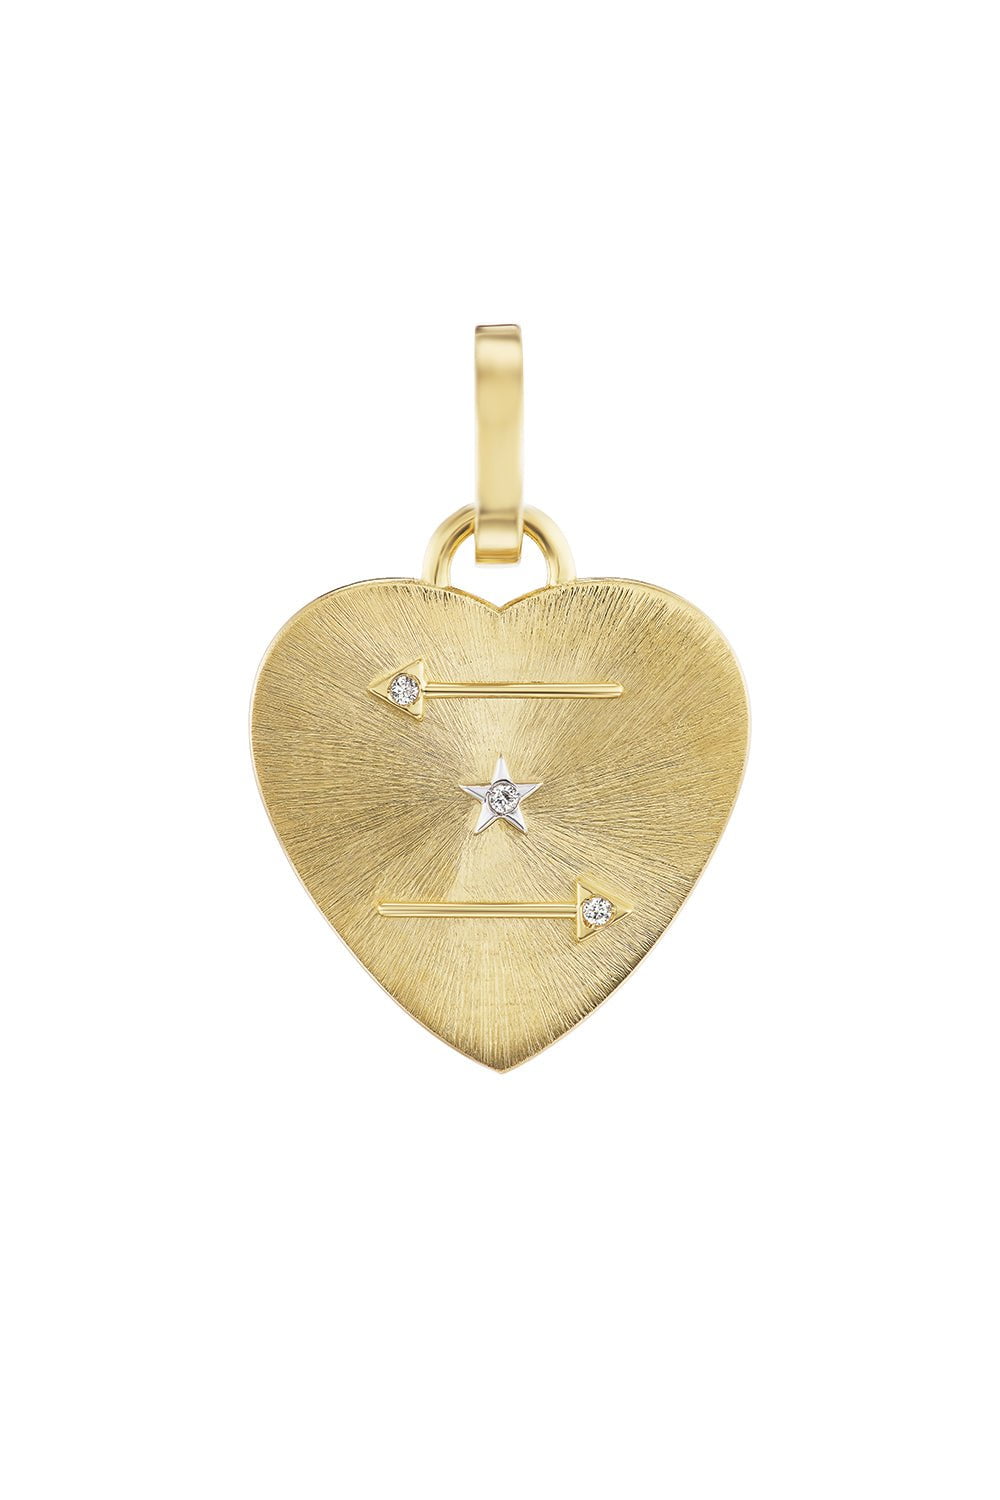 HAVE A HEART X MUSE-Ora Heart Charm-YELLOW GOLD